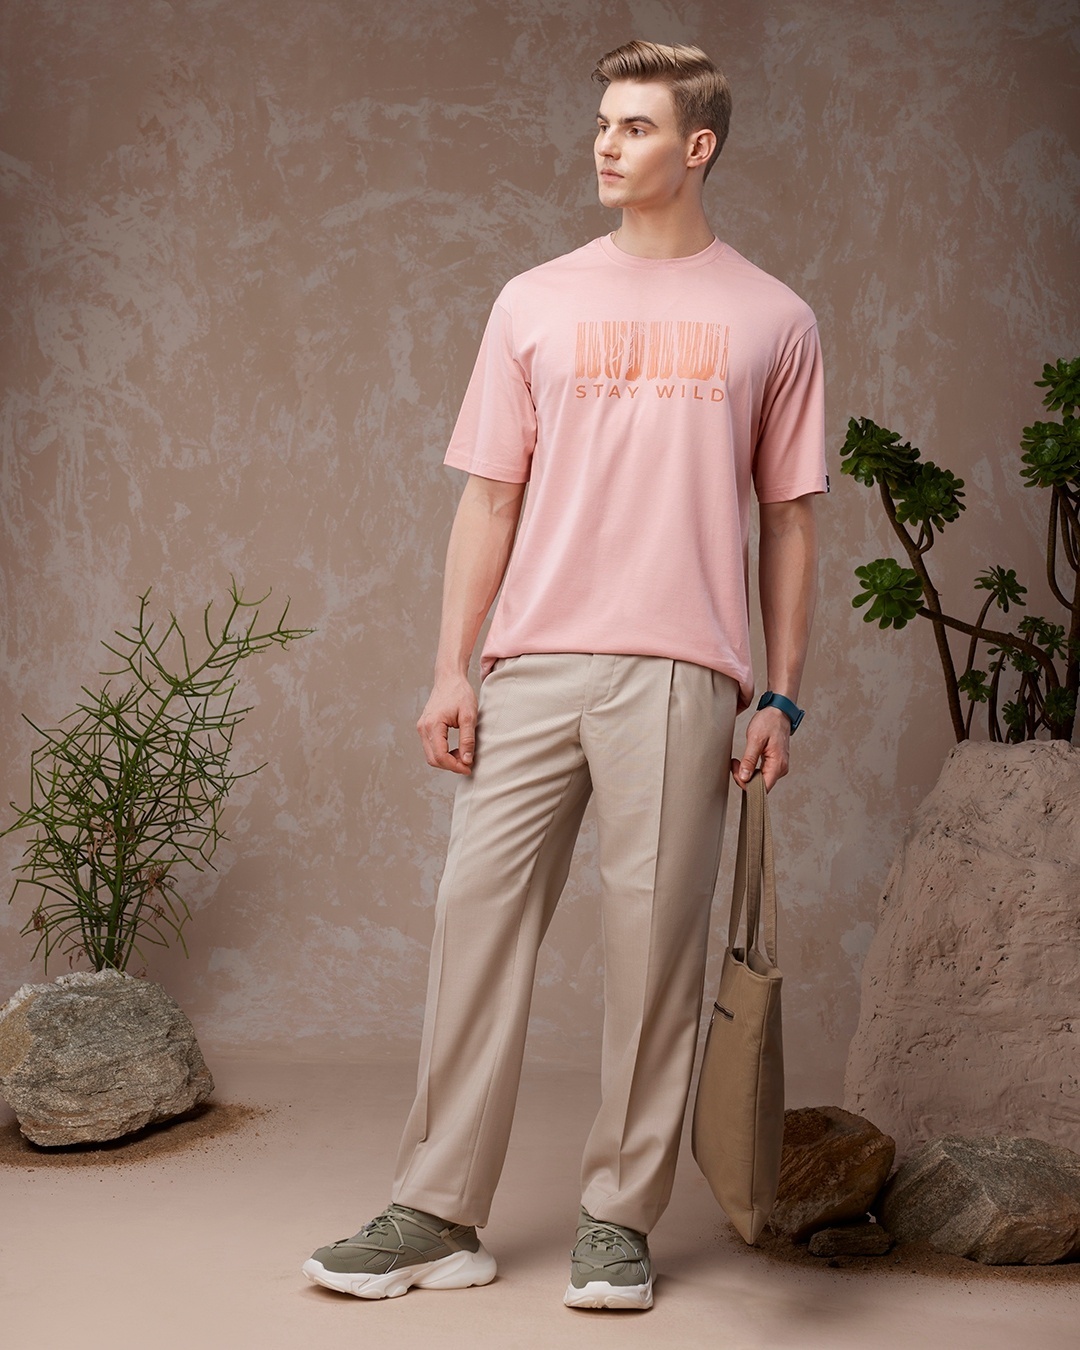 Pink & Grey - Color Combinations for Men 